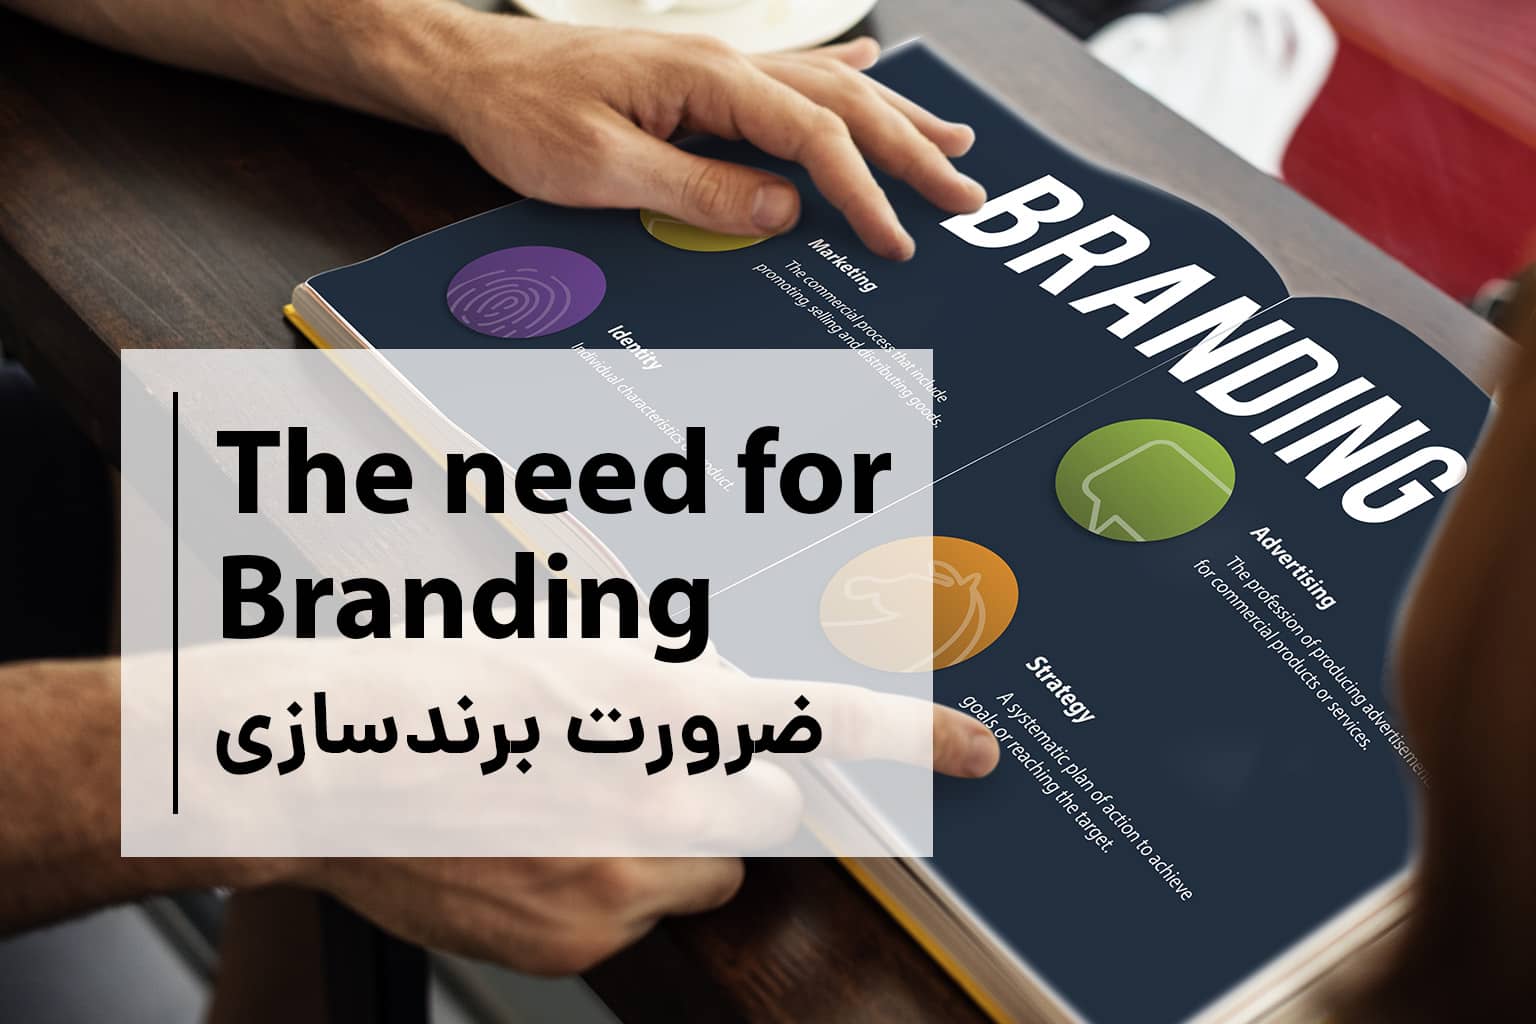 The need for branding